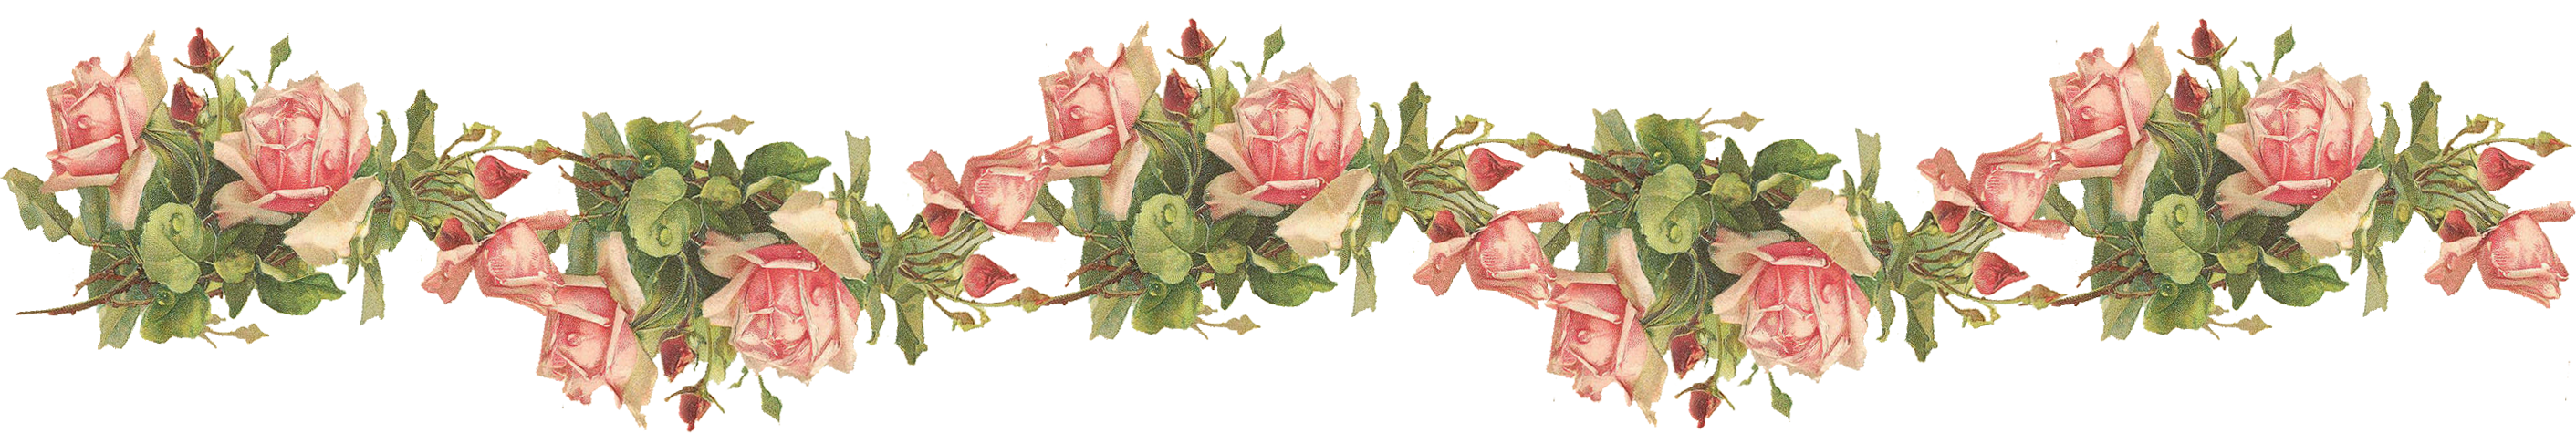 Catherine Klein  Pink Roses Digital Elements   Wings Of Whimsy